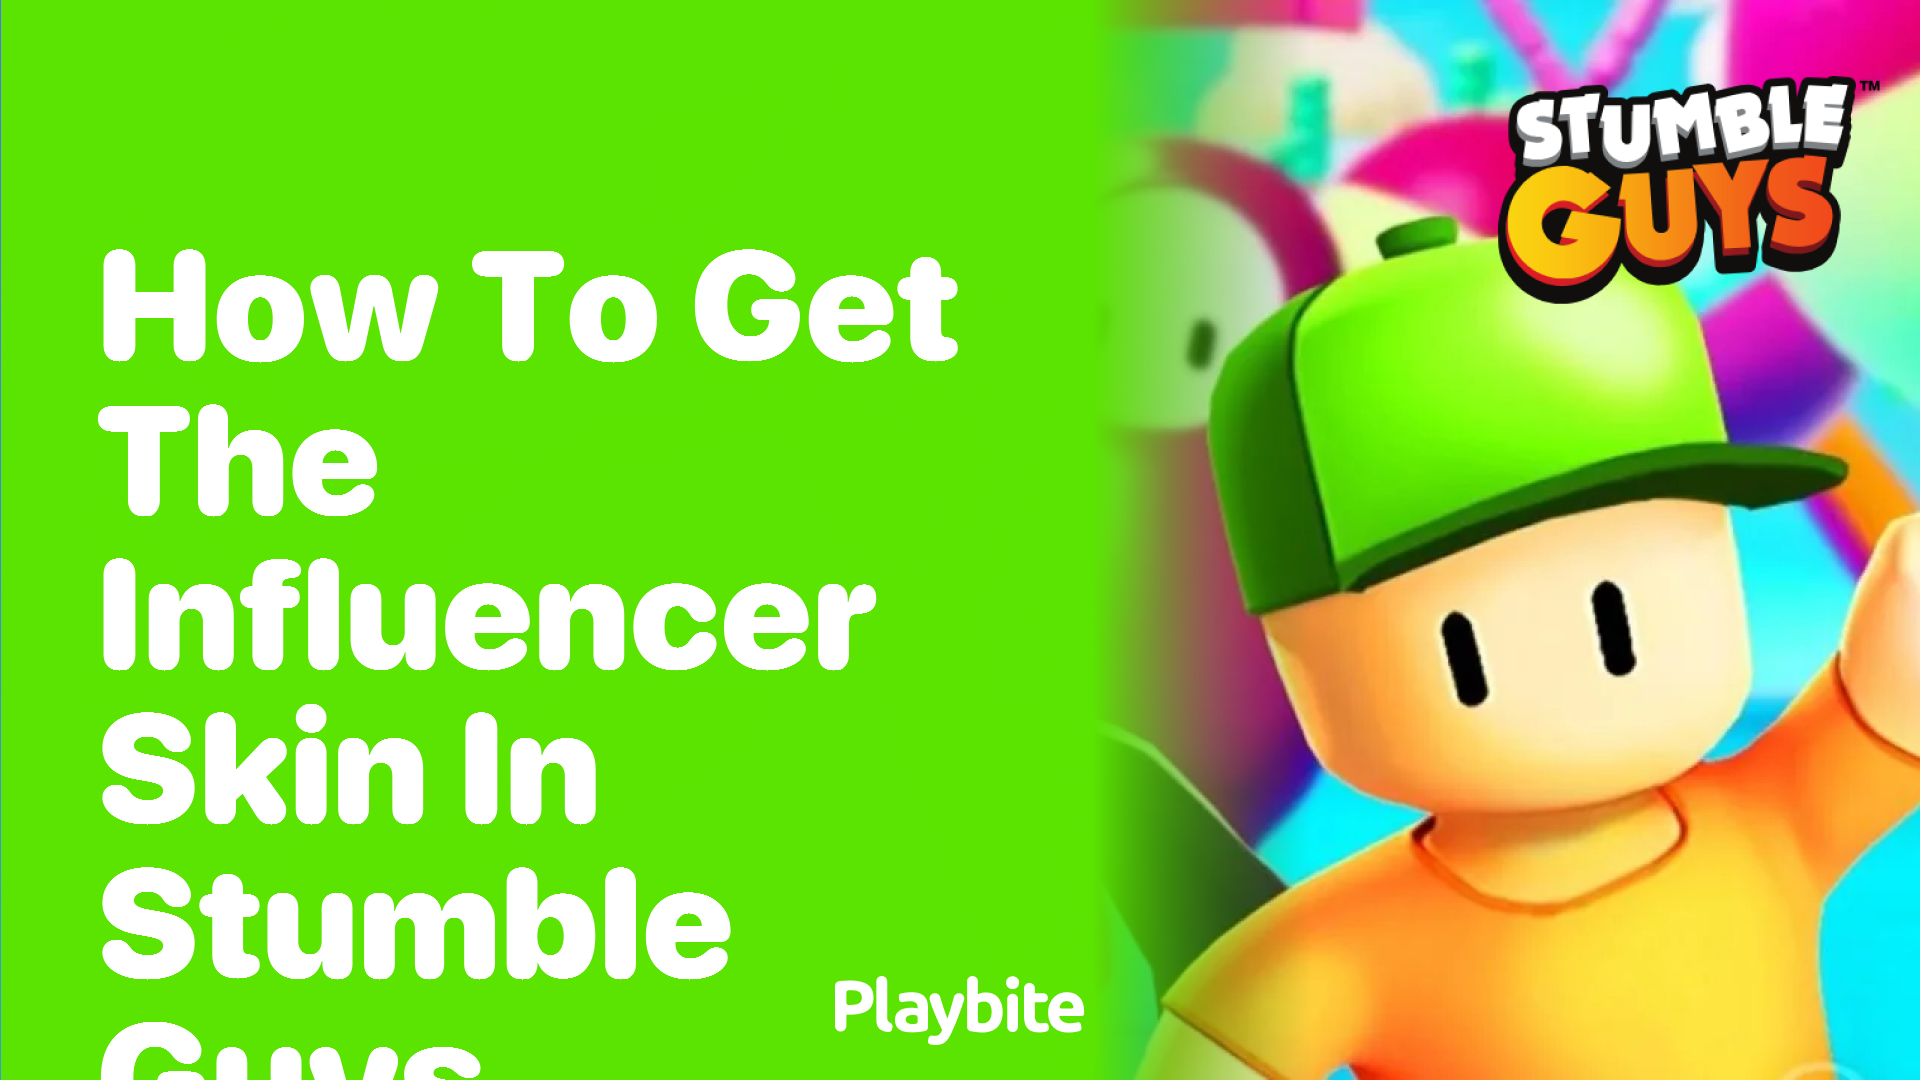 How to Get the Influencer Skin in Stumble Guys